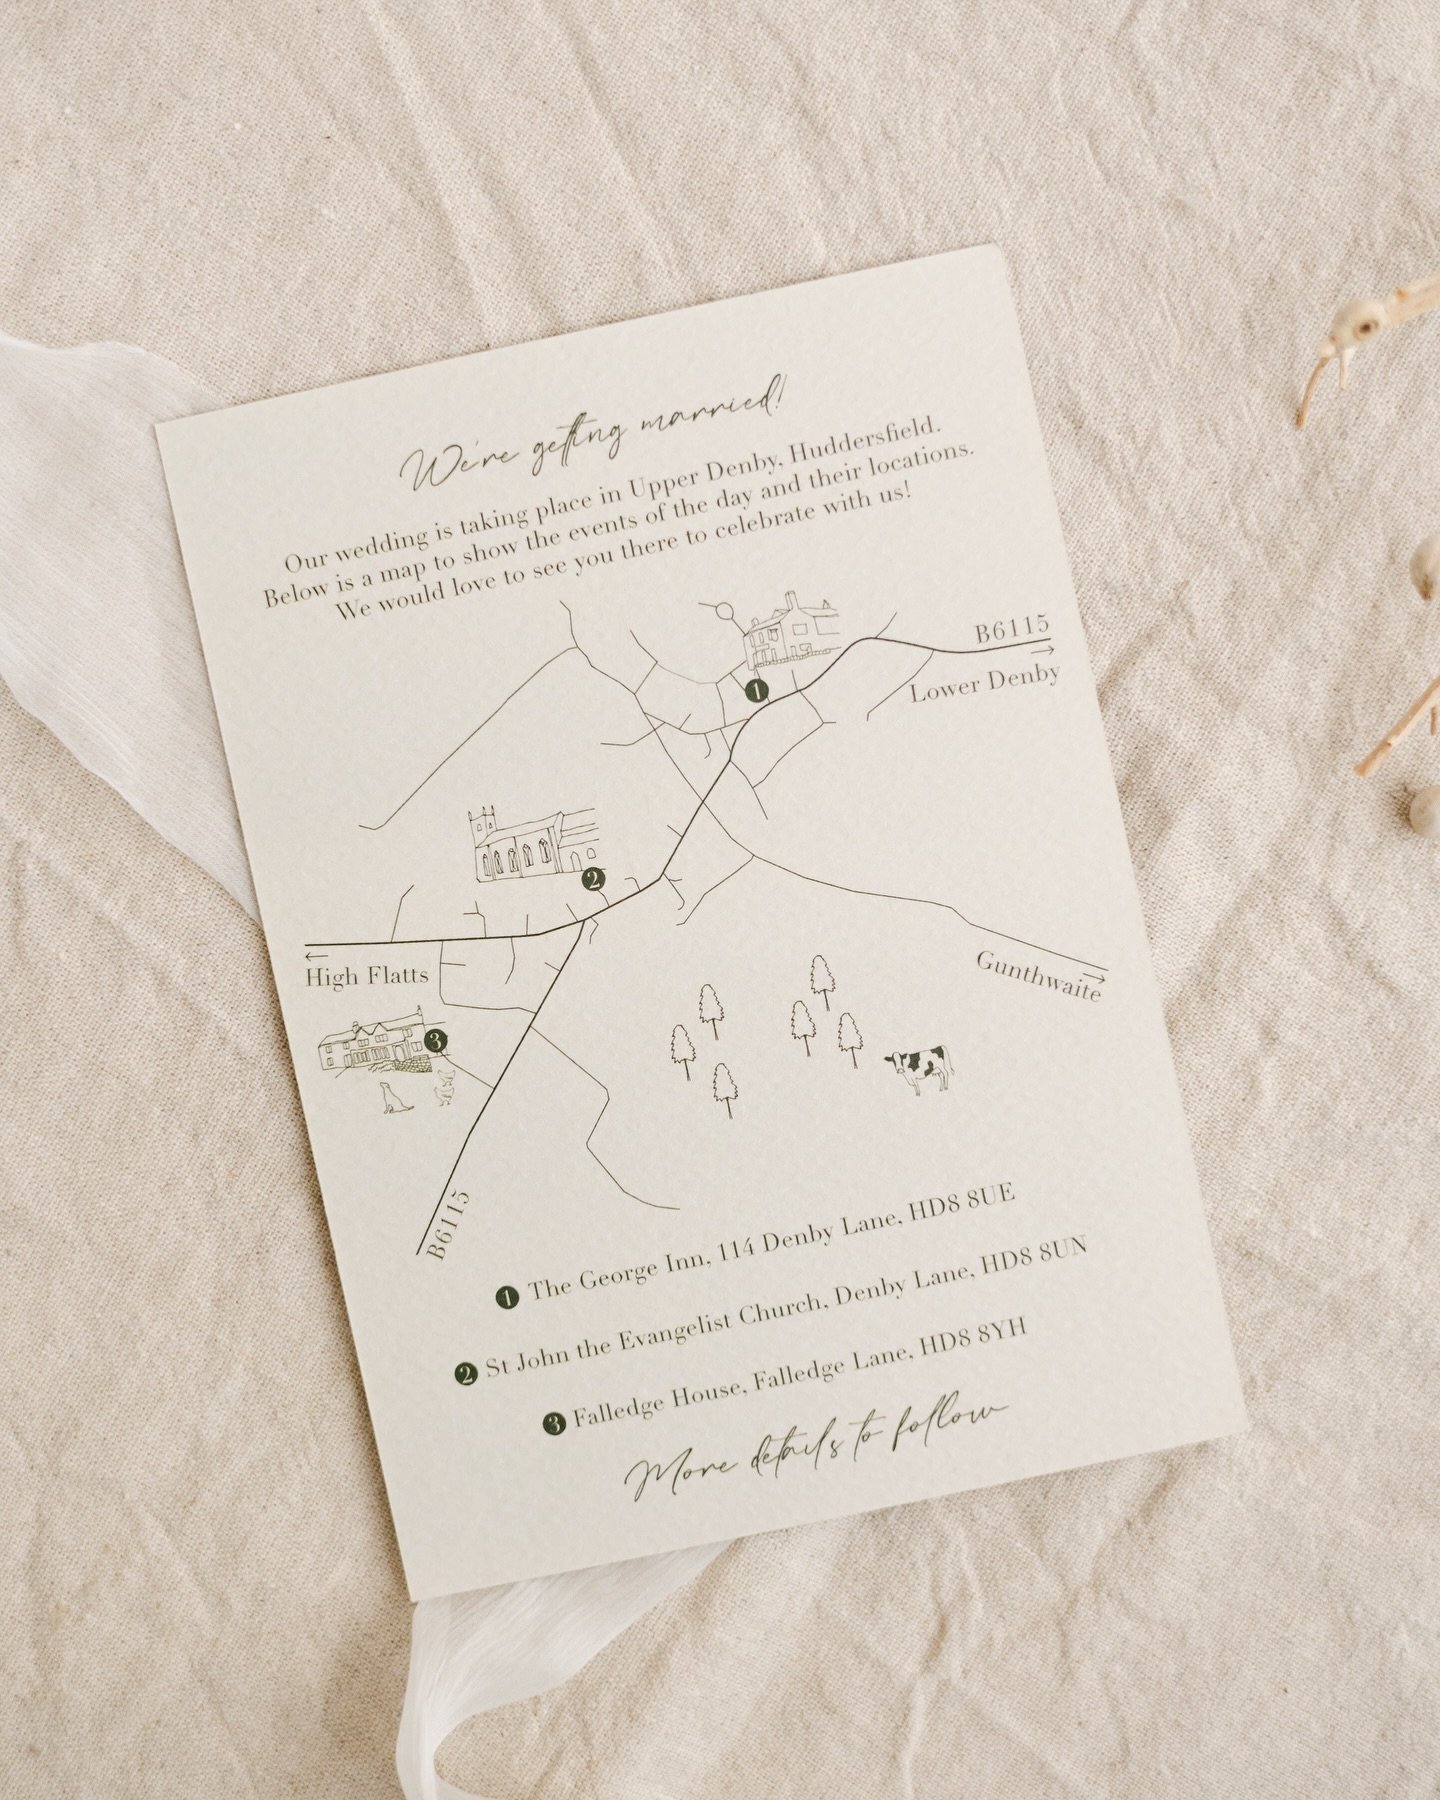 Illustrated Maps ✨

It&rsquo;s no secret that they&rsquo;re my favourite thing to design - they&rsquo;re such a perfect addition to your wedding stationery to add a lovely personal touch. I&rsquo;d love to hear from you if there is a particular desig